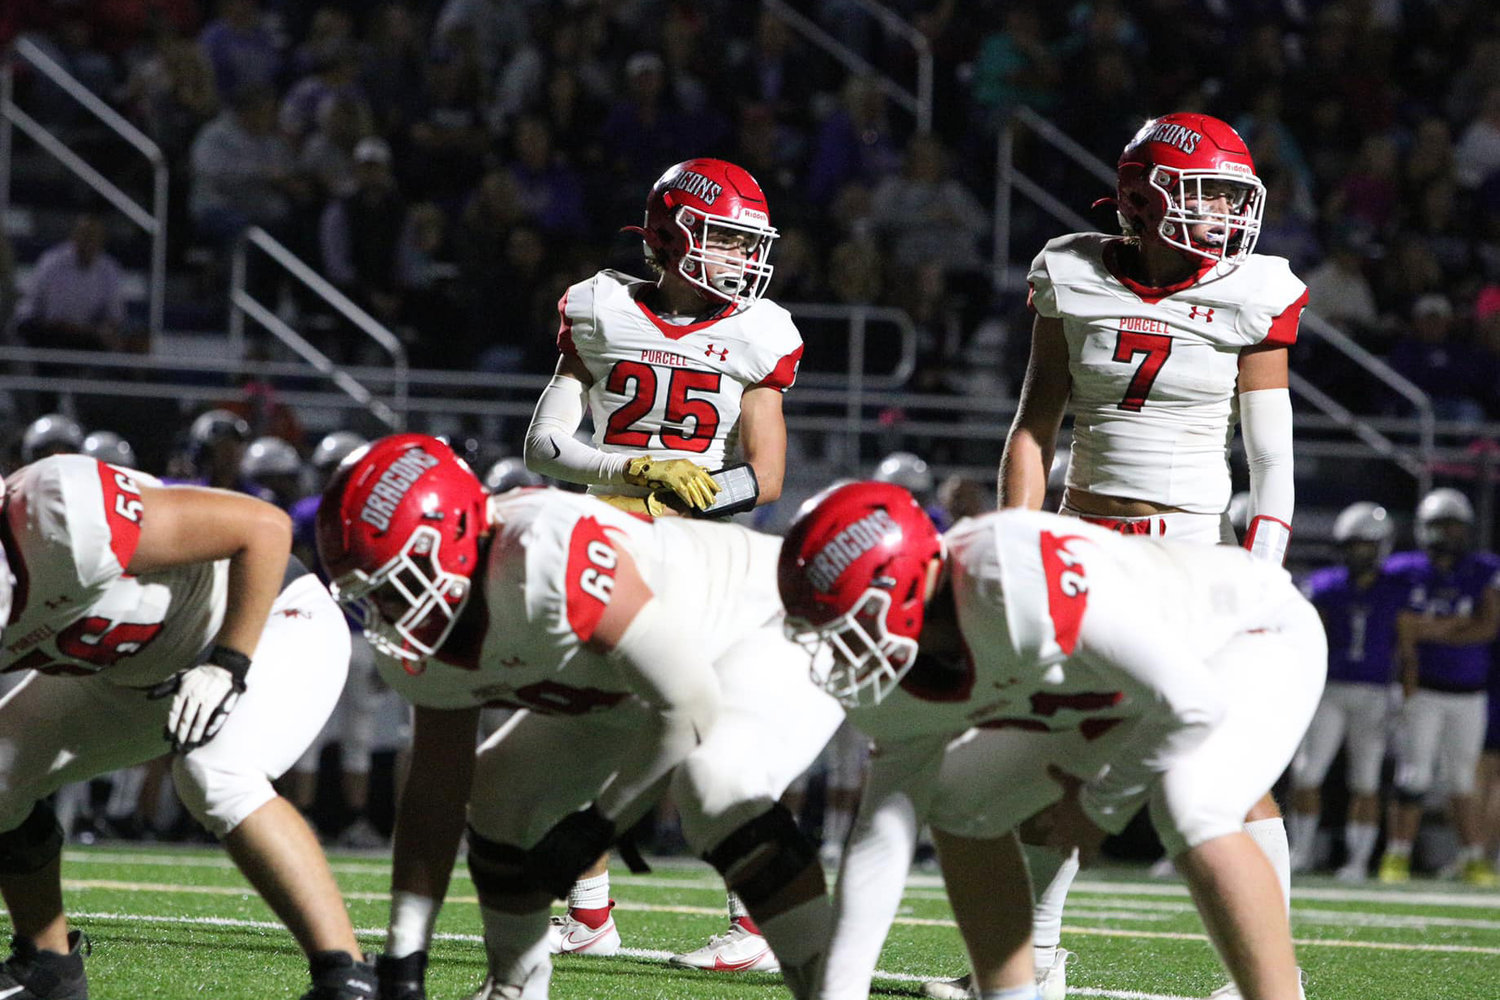 Boston Knowles (25) and Creed Smith (7) look to the sidelines behind Jace Clary (56), Brendan Bacon (69) and Brody Holder (31) during last week’s game against CCS. The Dragons lost to the Royals 38-17 and host Lexington in the Battle for the Bridge Friday night at 7 p.m.